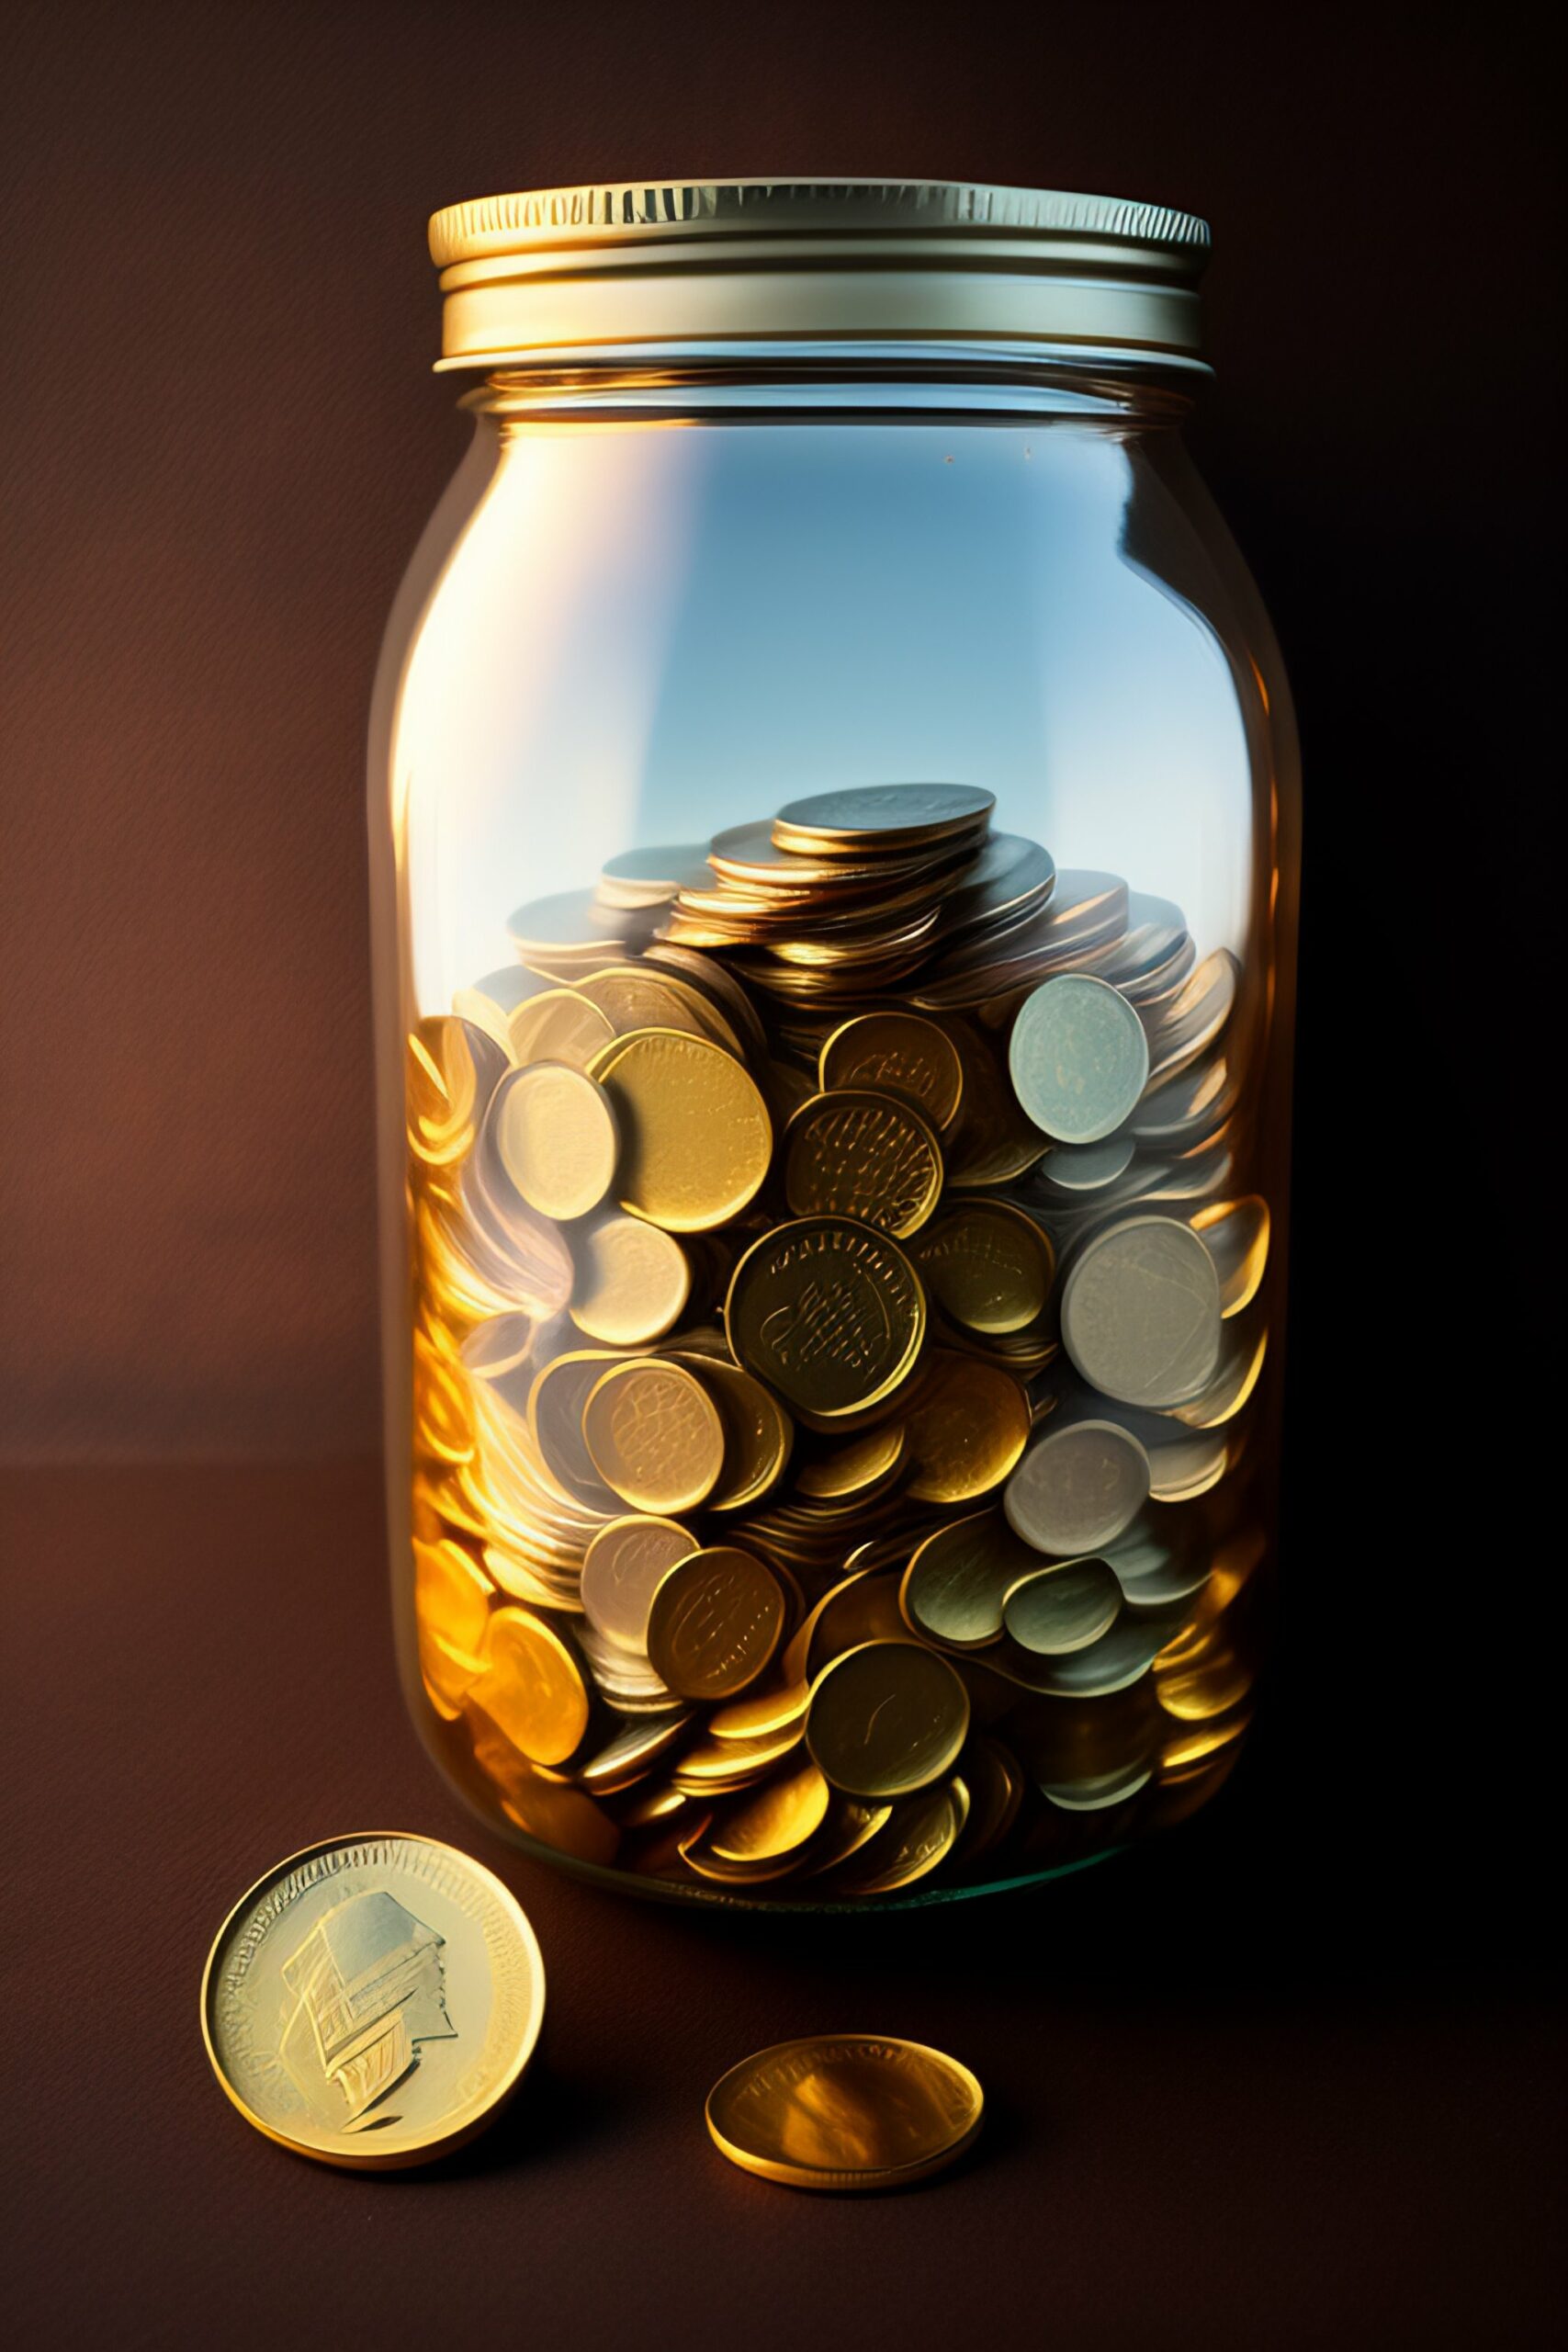 Dollars Jar Financial Literacy A Guide to Creating a Secure Financial Future